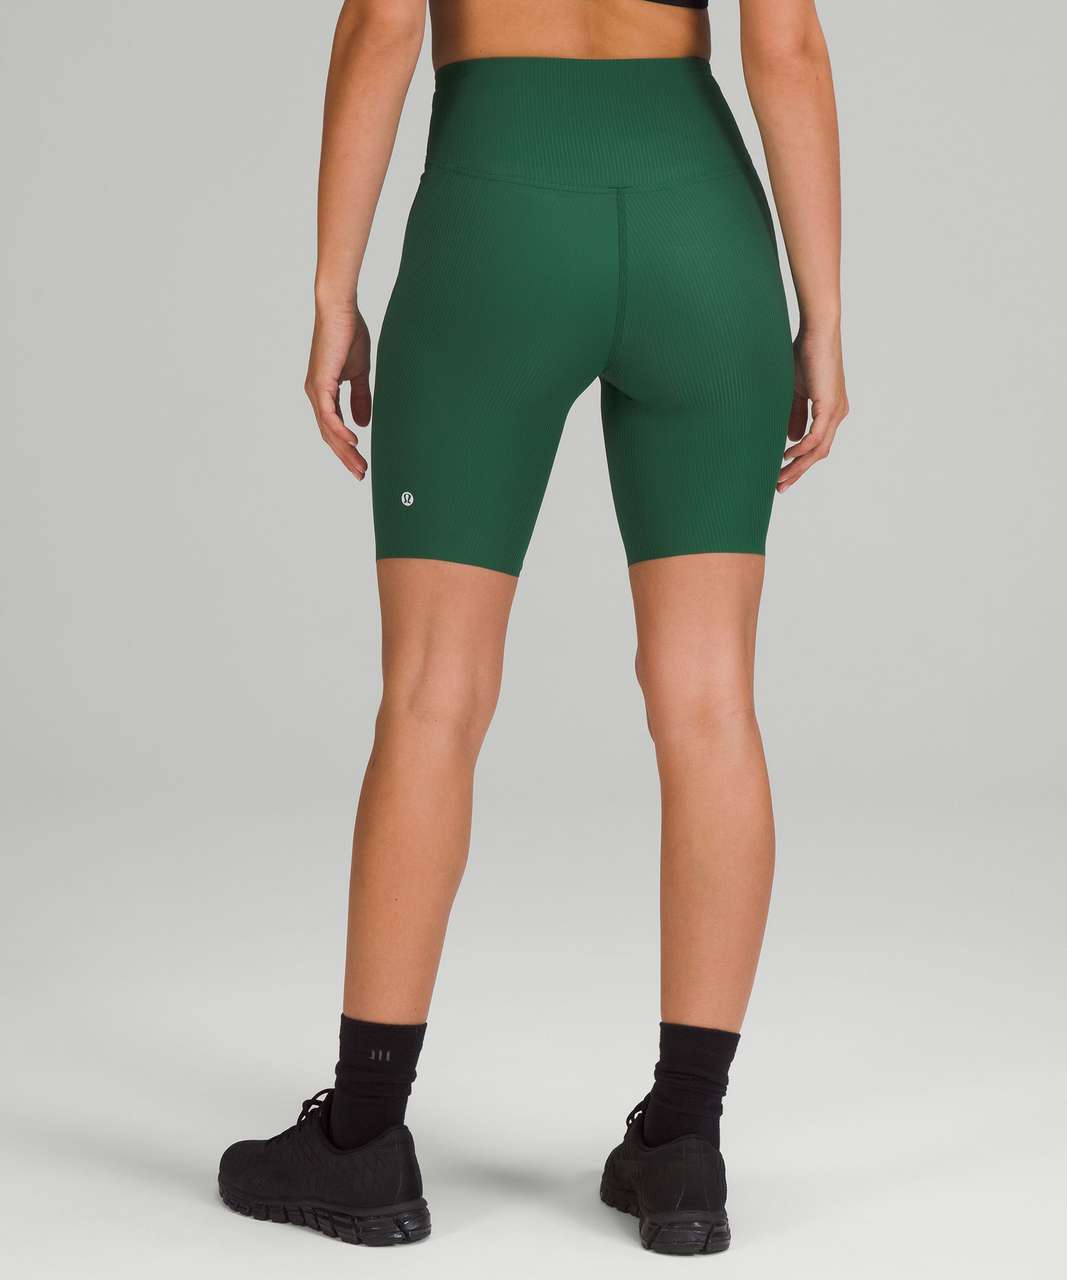 Lululemon Base Pace High-Rise Short 8" *Ribbed Nulux - Everglade Green